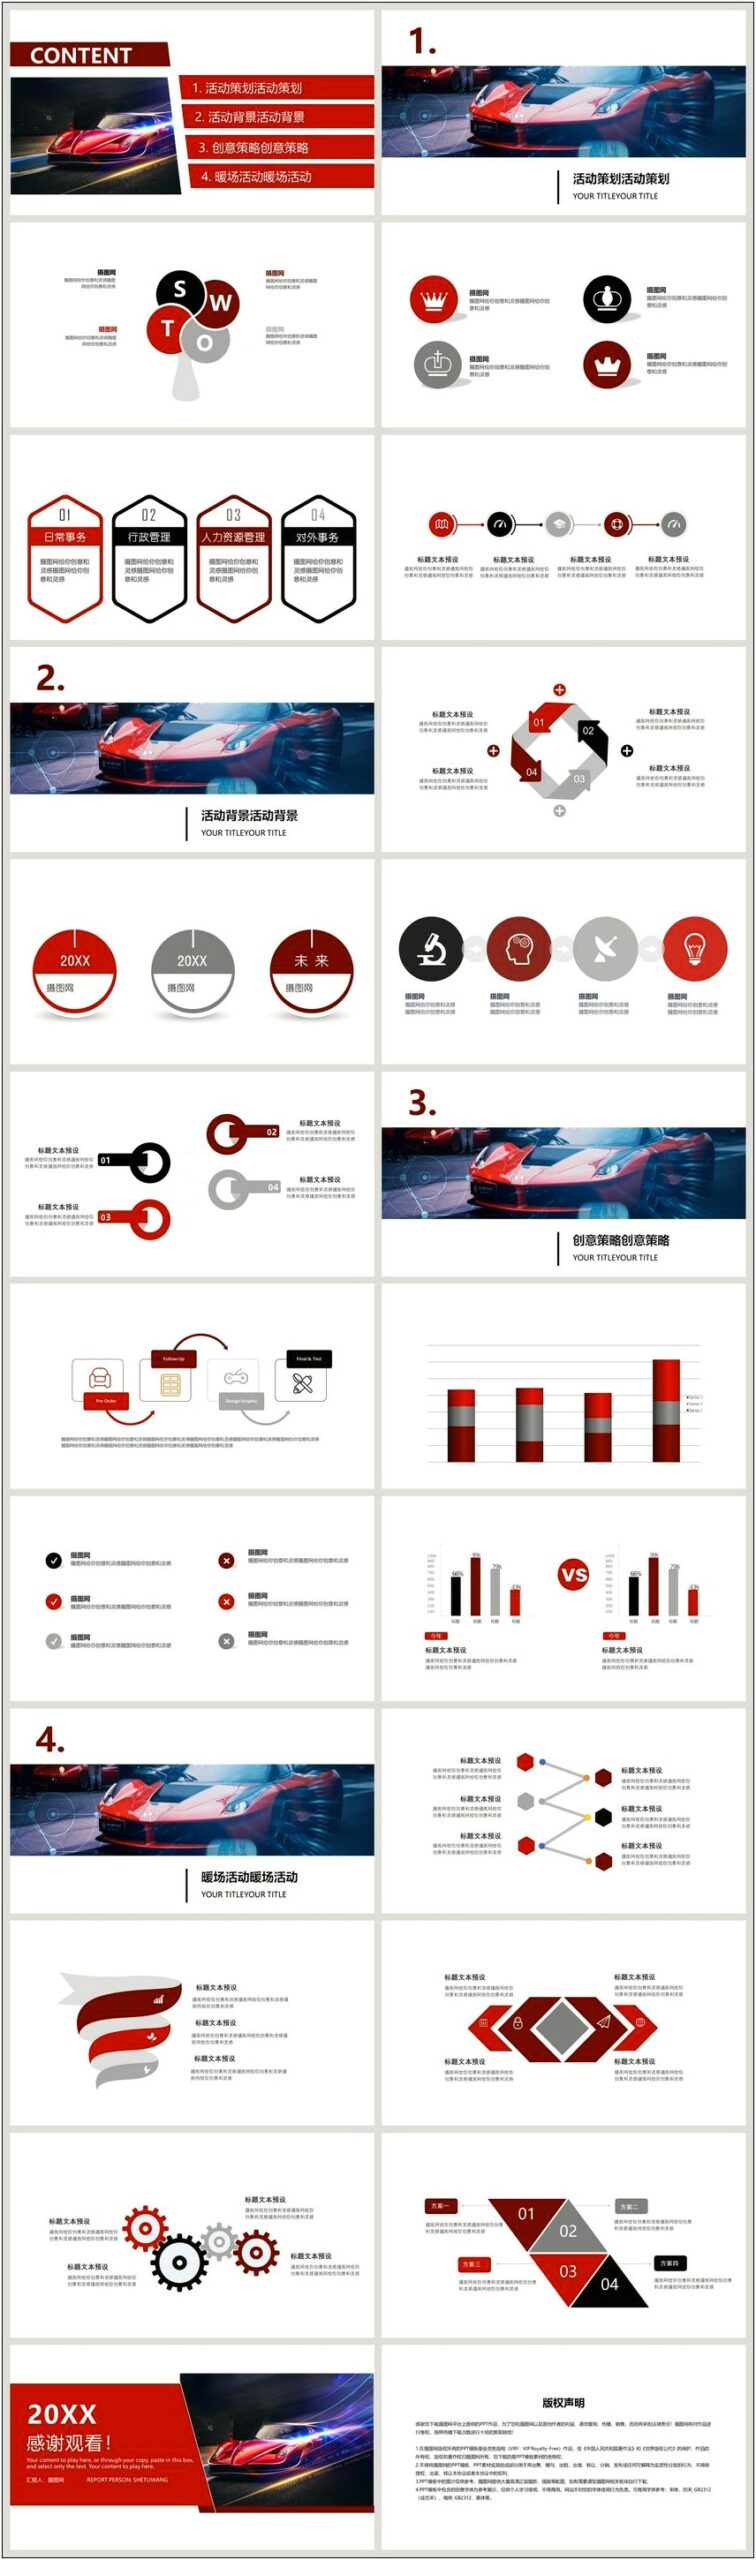 Free Powerpoint Templates For Automobile Industry